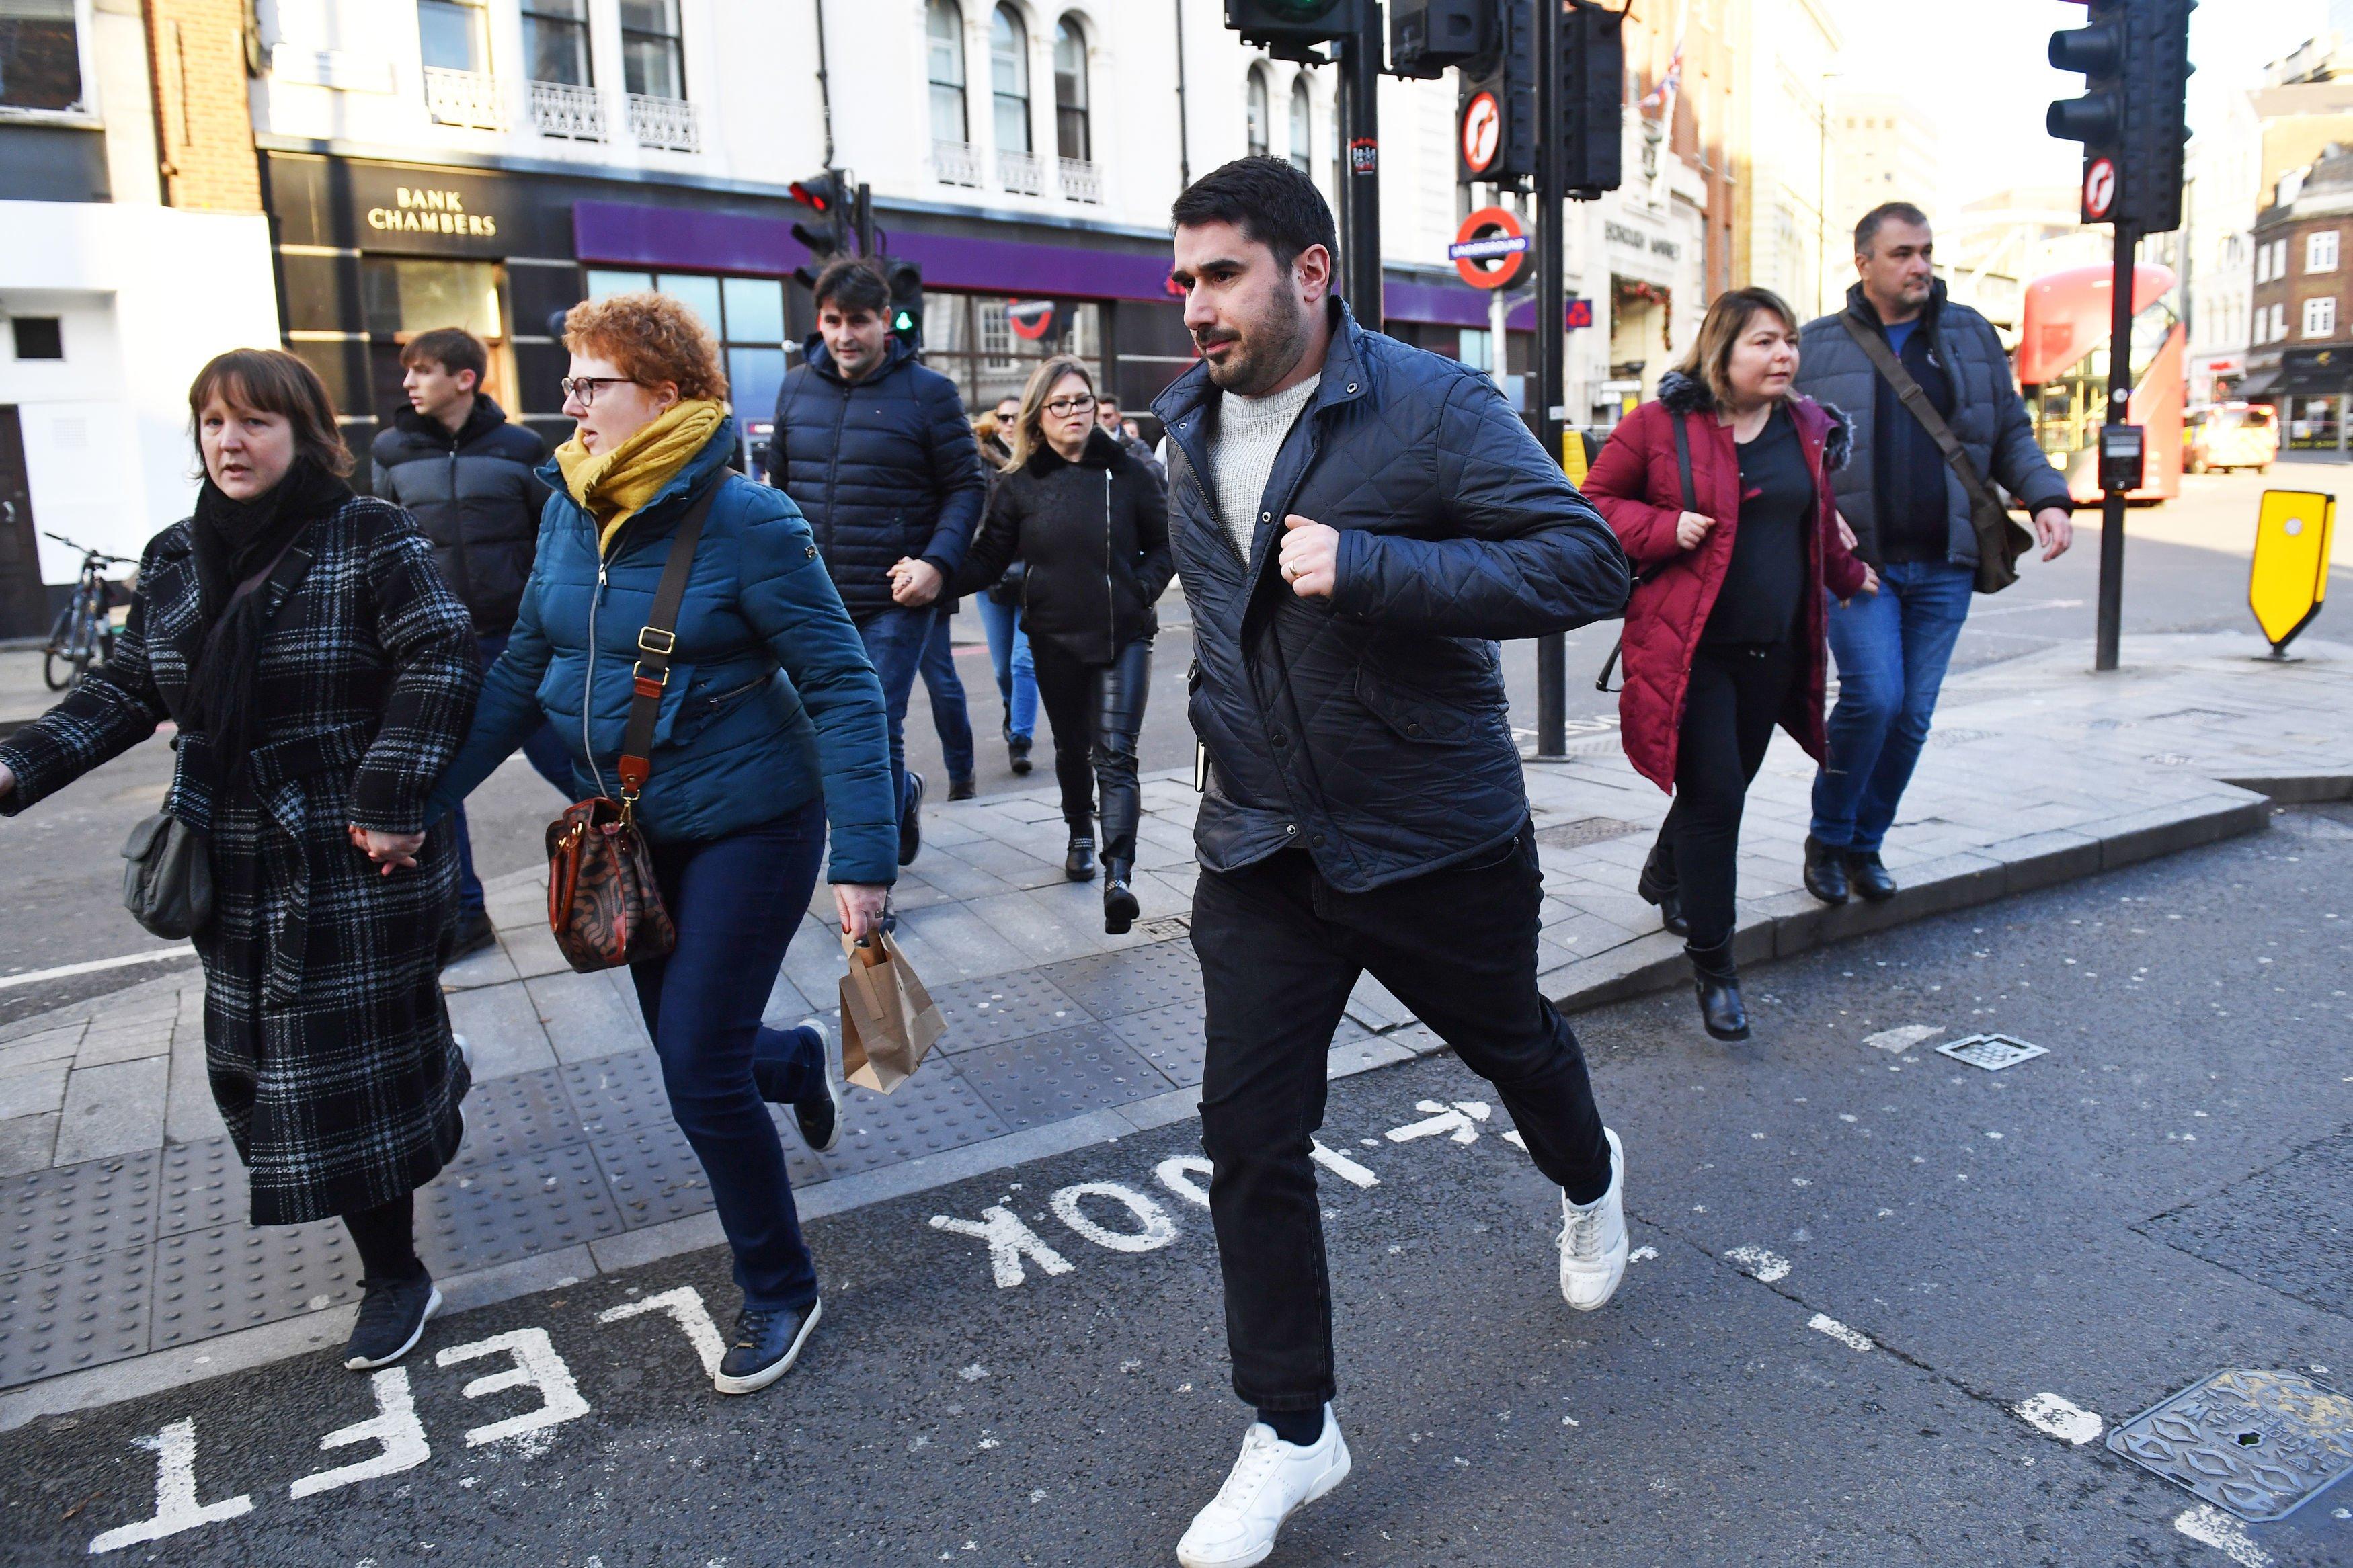 People running away from Borough Market in London after police told them to leave the area. PA Photo. Picture date: Friday November 29, 2019. See PA story POLICE LondonBridge. Photo credit should read: Dominic Lipinski/PA Wire